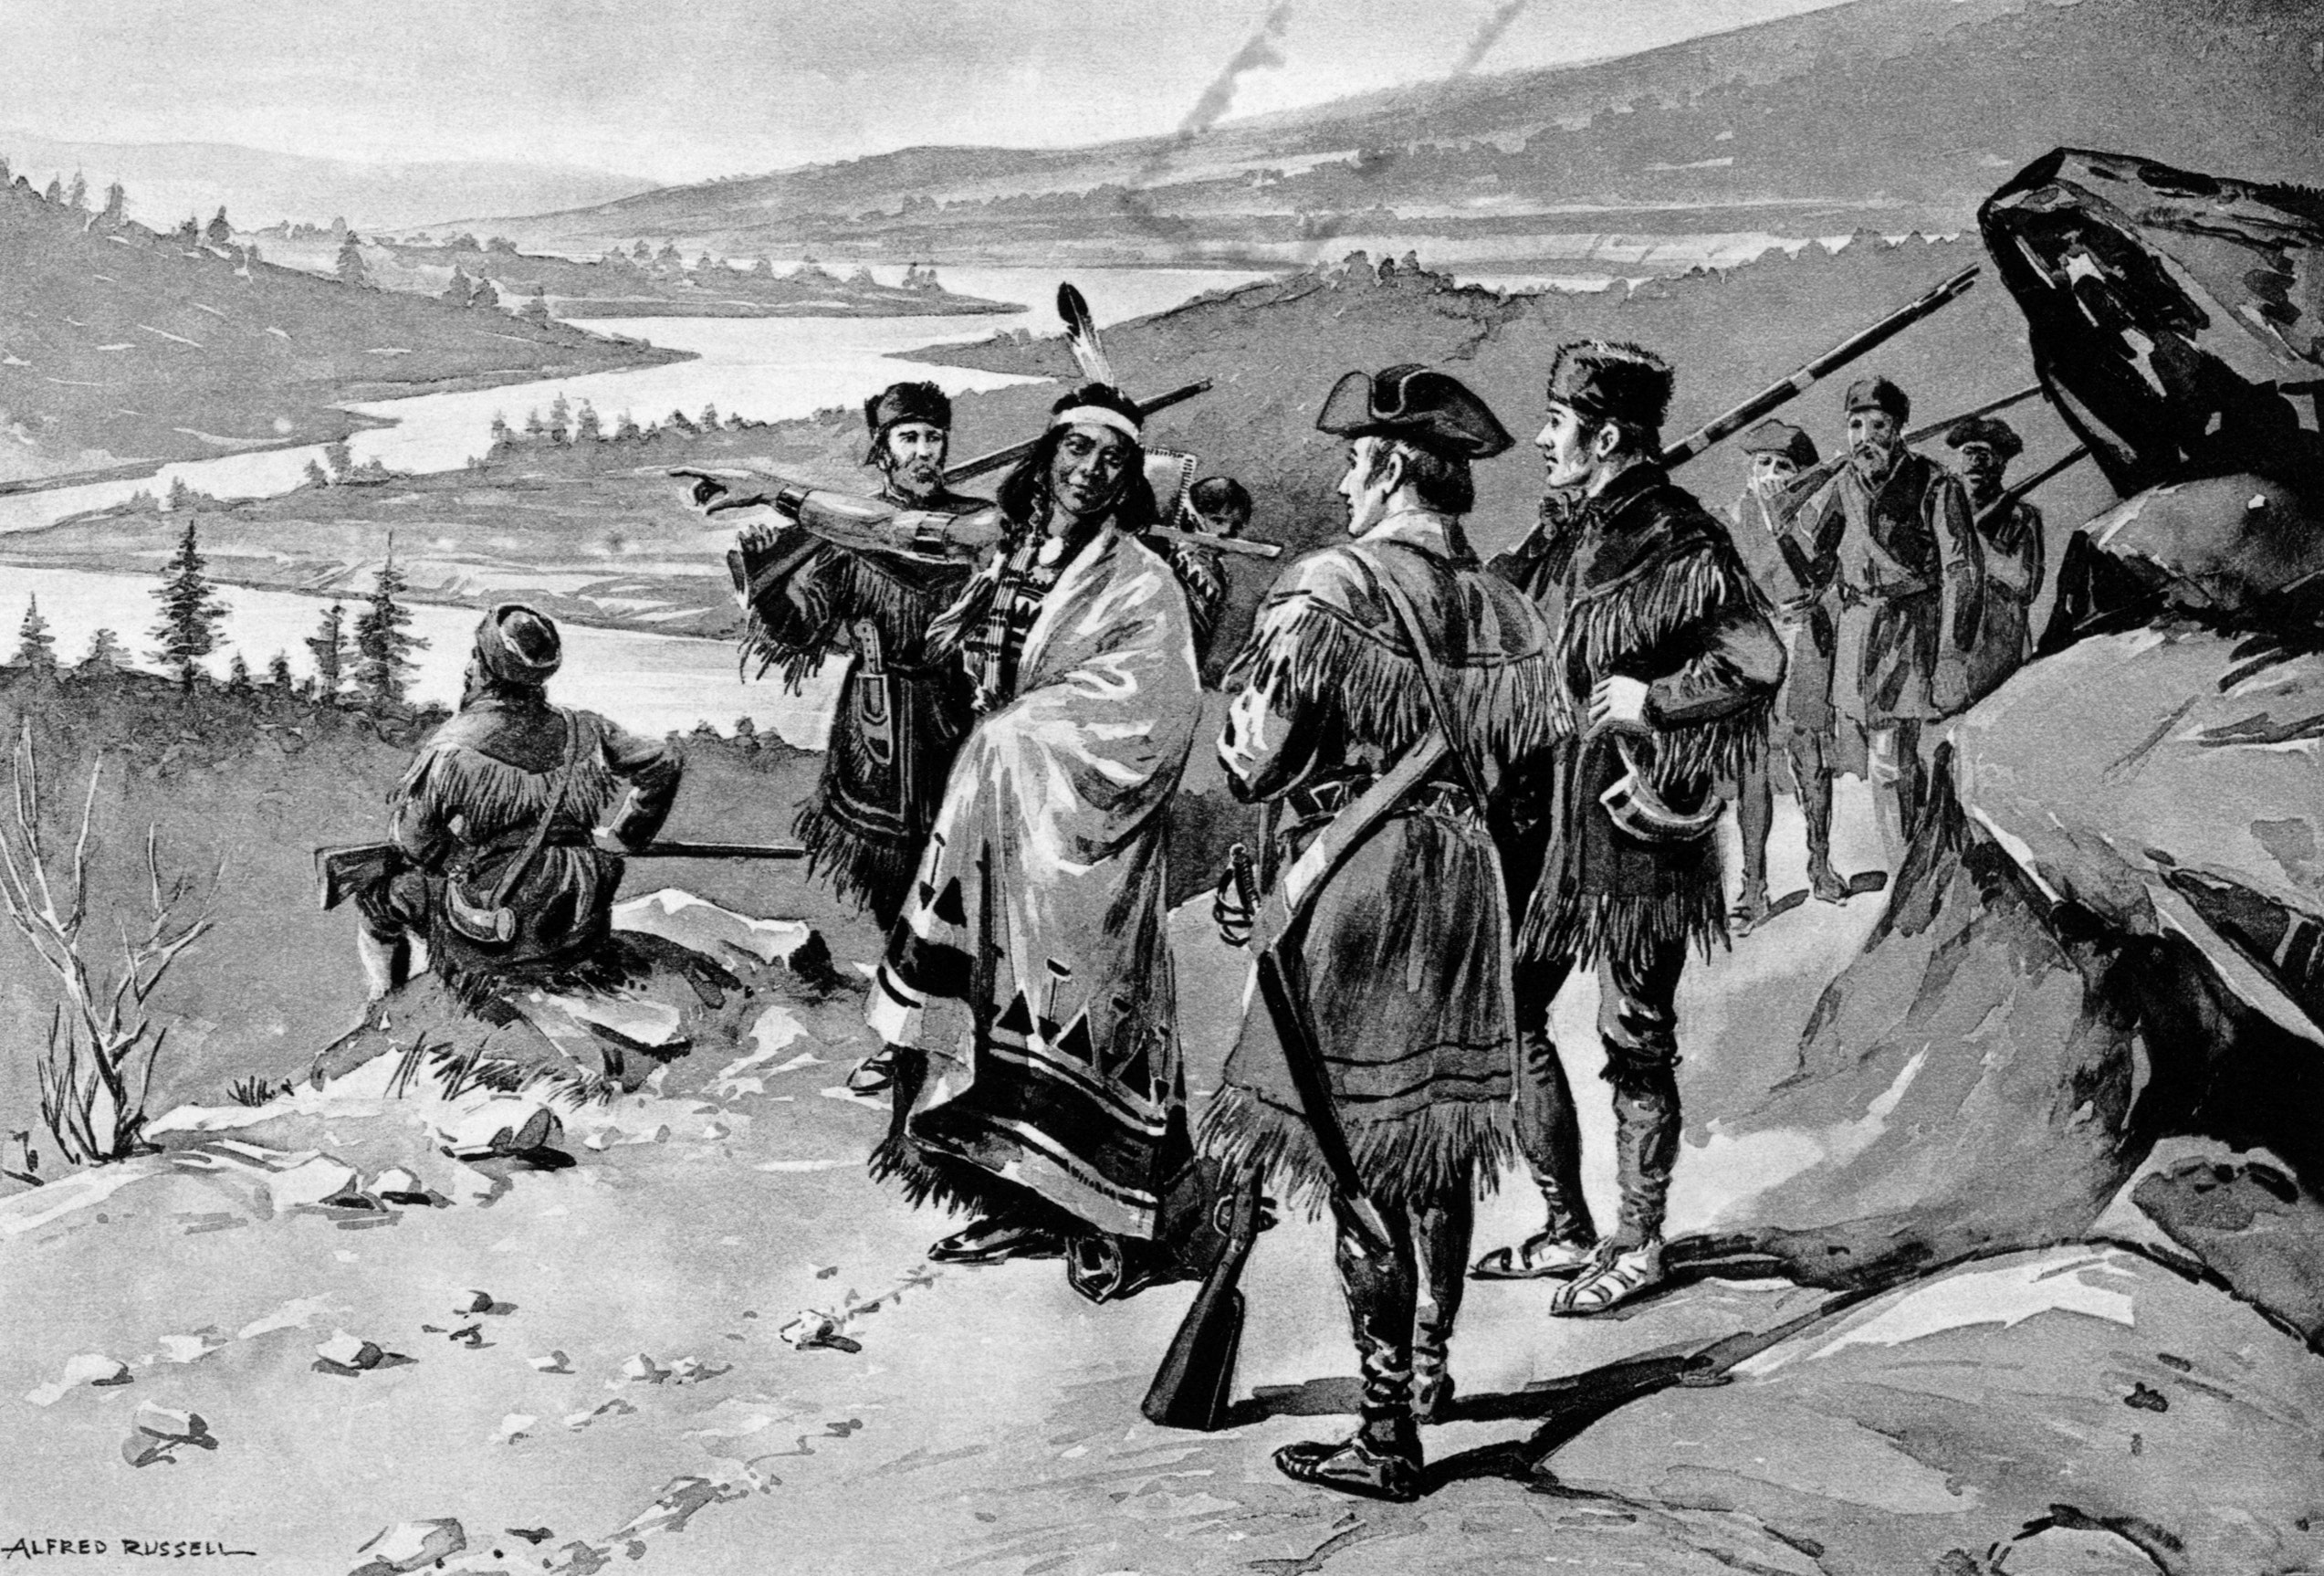 On this day in history, Sept. 23, 1806, Lewis and Clark return to St. Louis as heroes after journey